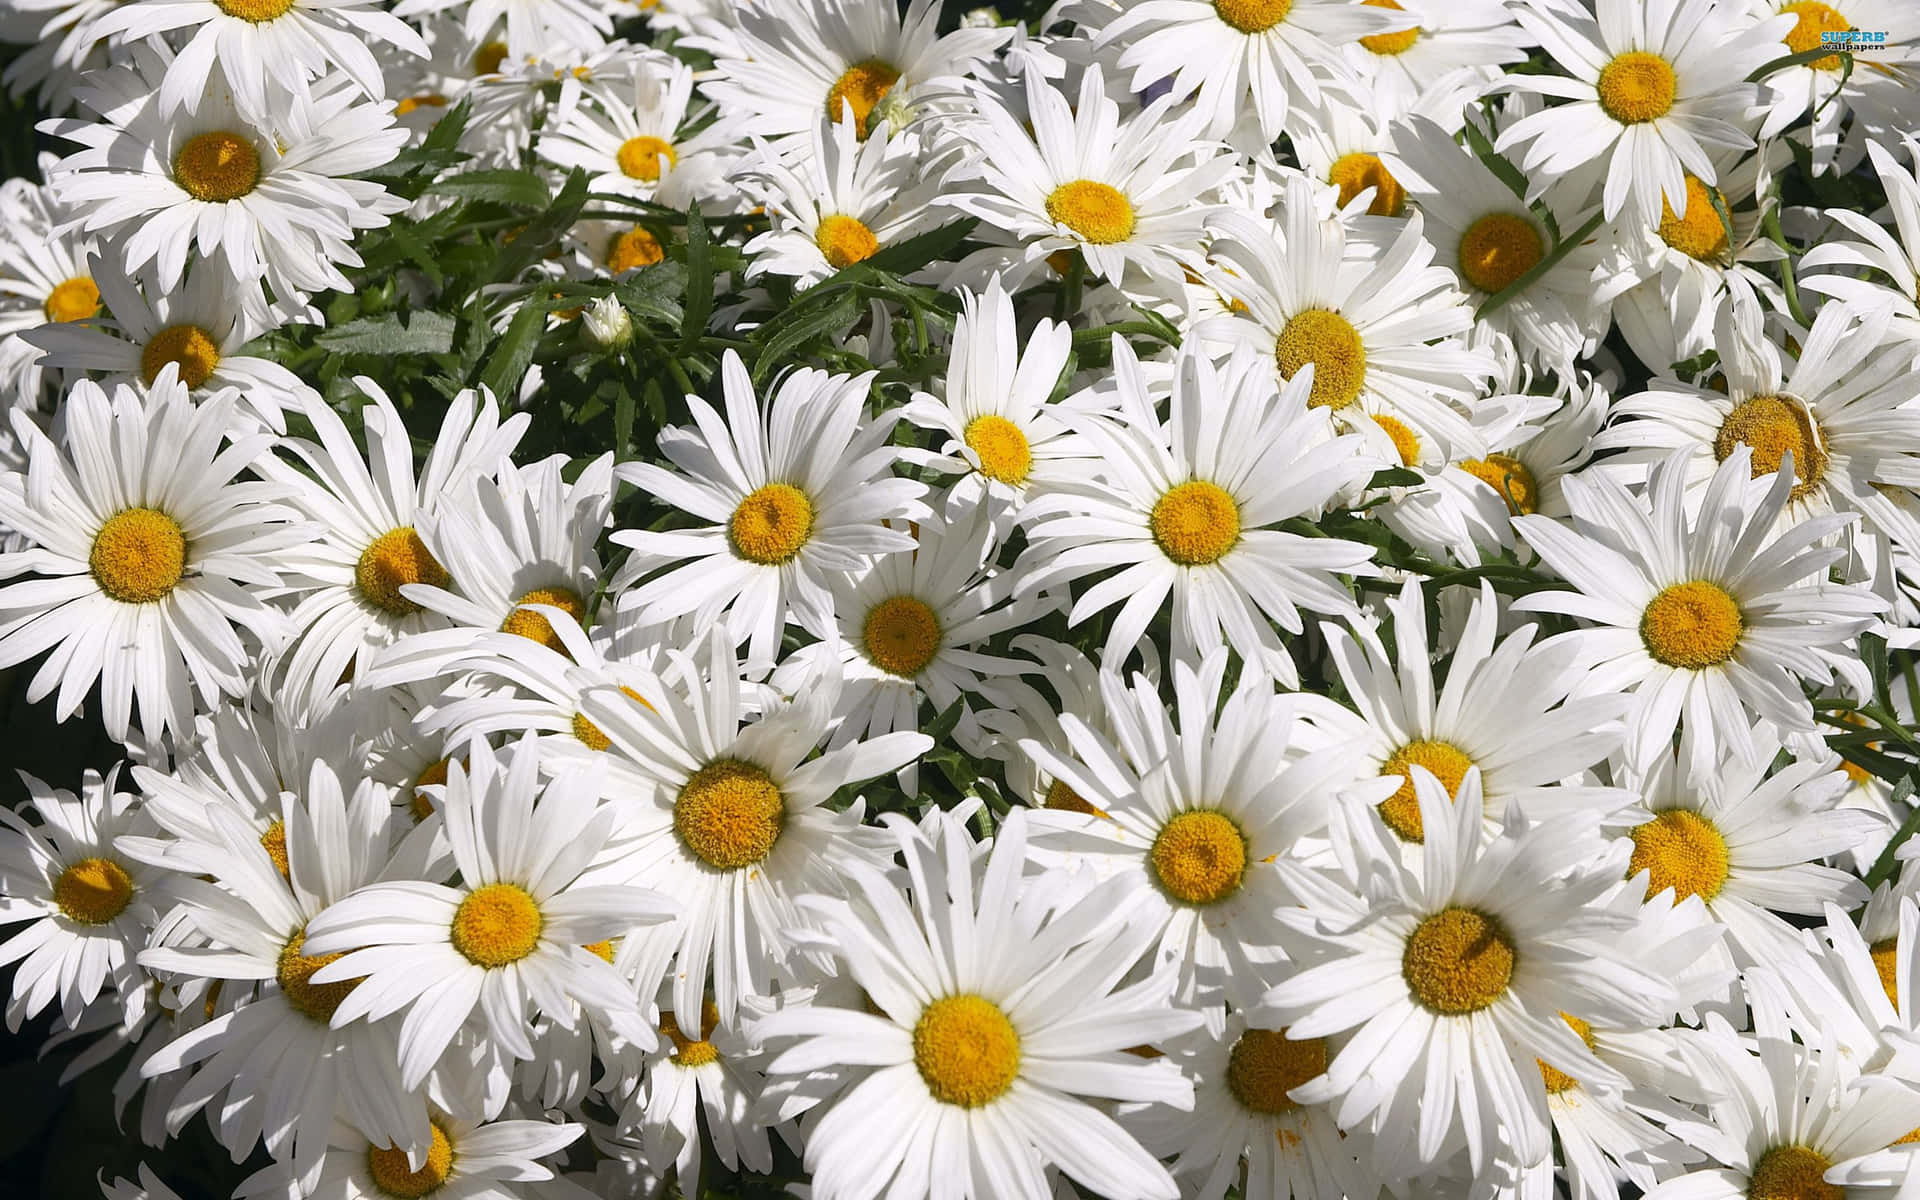 Caption: Vibrant Daisy Blooming on Laptop Screen Wallpaper